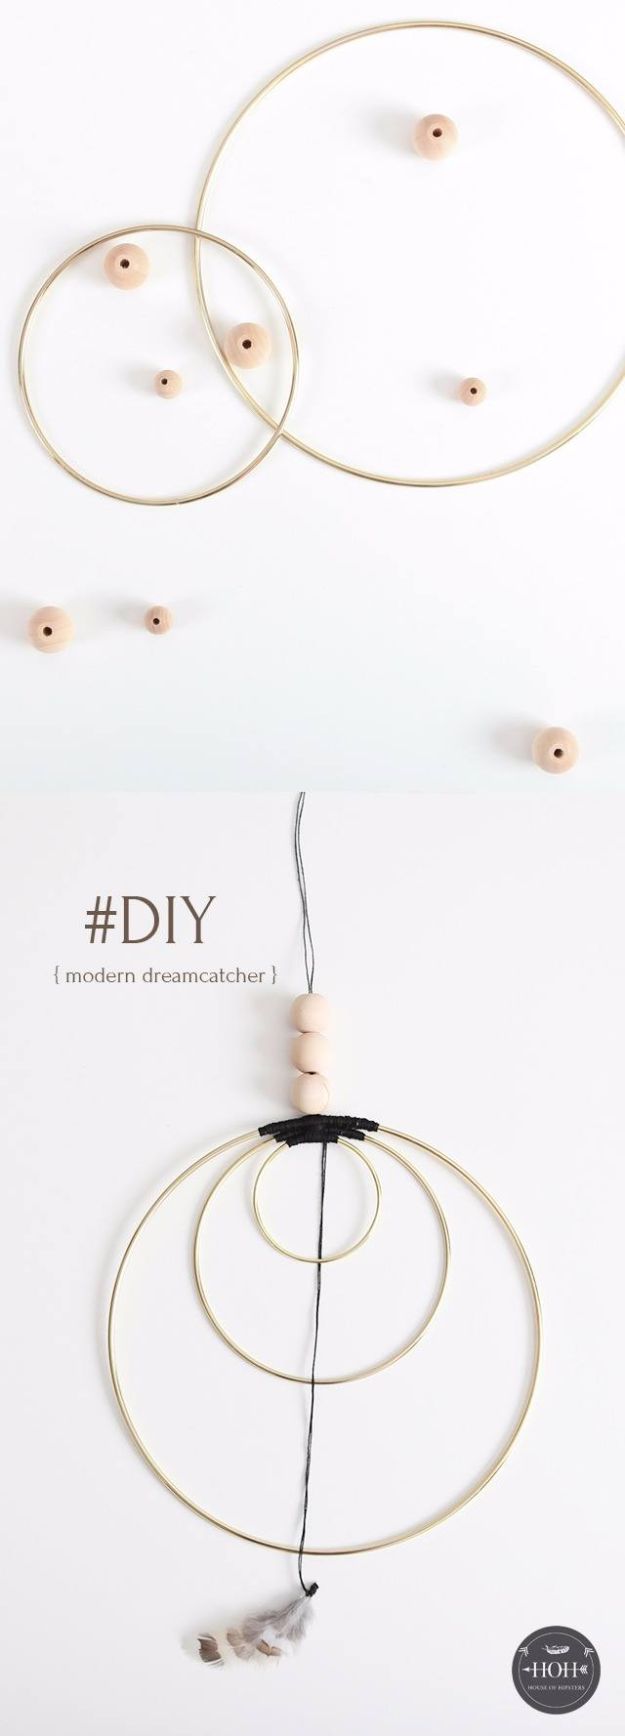 DIY Dream Catchers - Minimalist Dreamcatcher - How to Make a Dreamcatcher Step by Step Tutorial - Easy Ideas for Dream Catcher for Kids Room - Make a Mobile, Moon Designs, Pattern Ideas, Boho Dreamcatcher With Sticks, Cool Wall Hangings for Teen Rooms - Cheap Home Decor Ideas on A Budget #diyideas #teencrafts #dreamcatchers